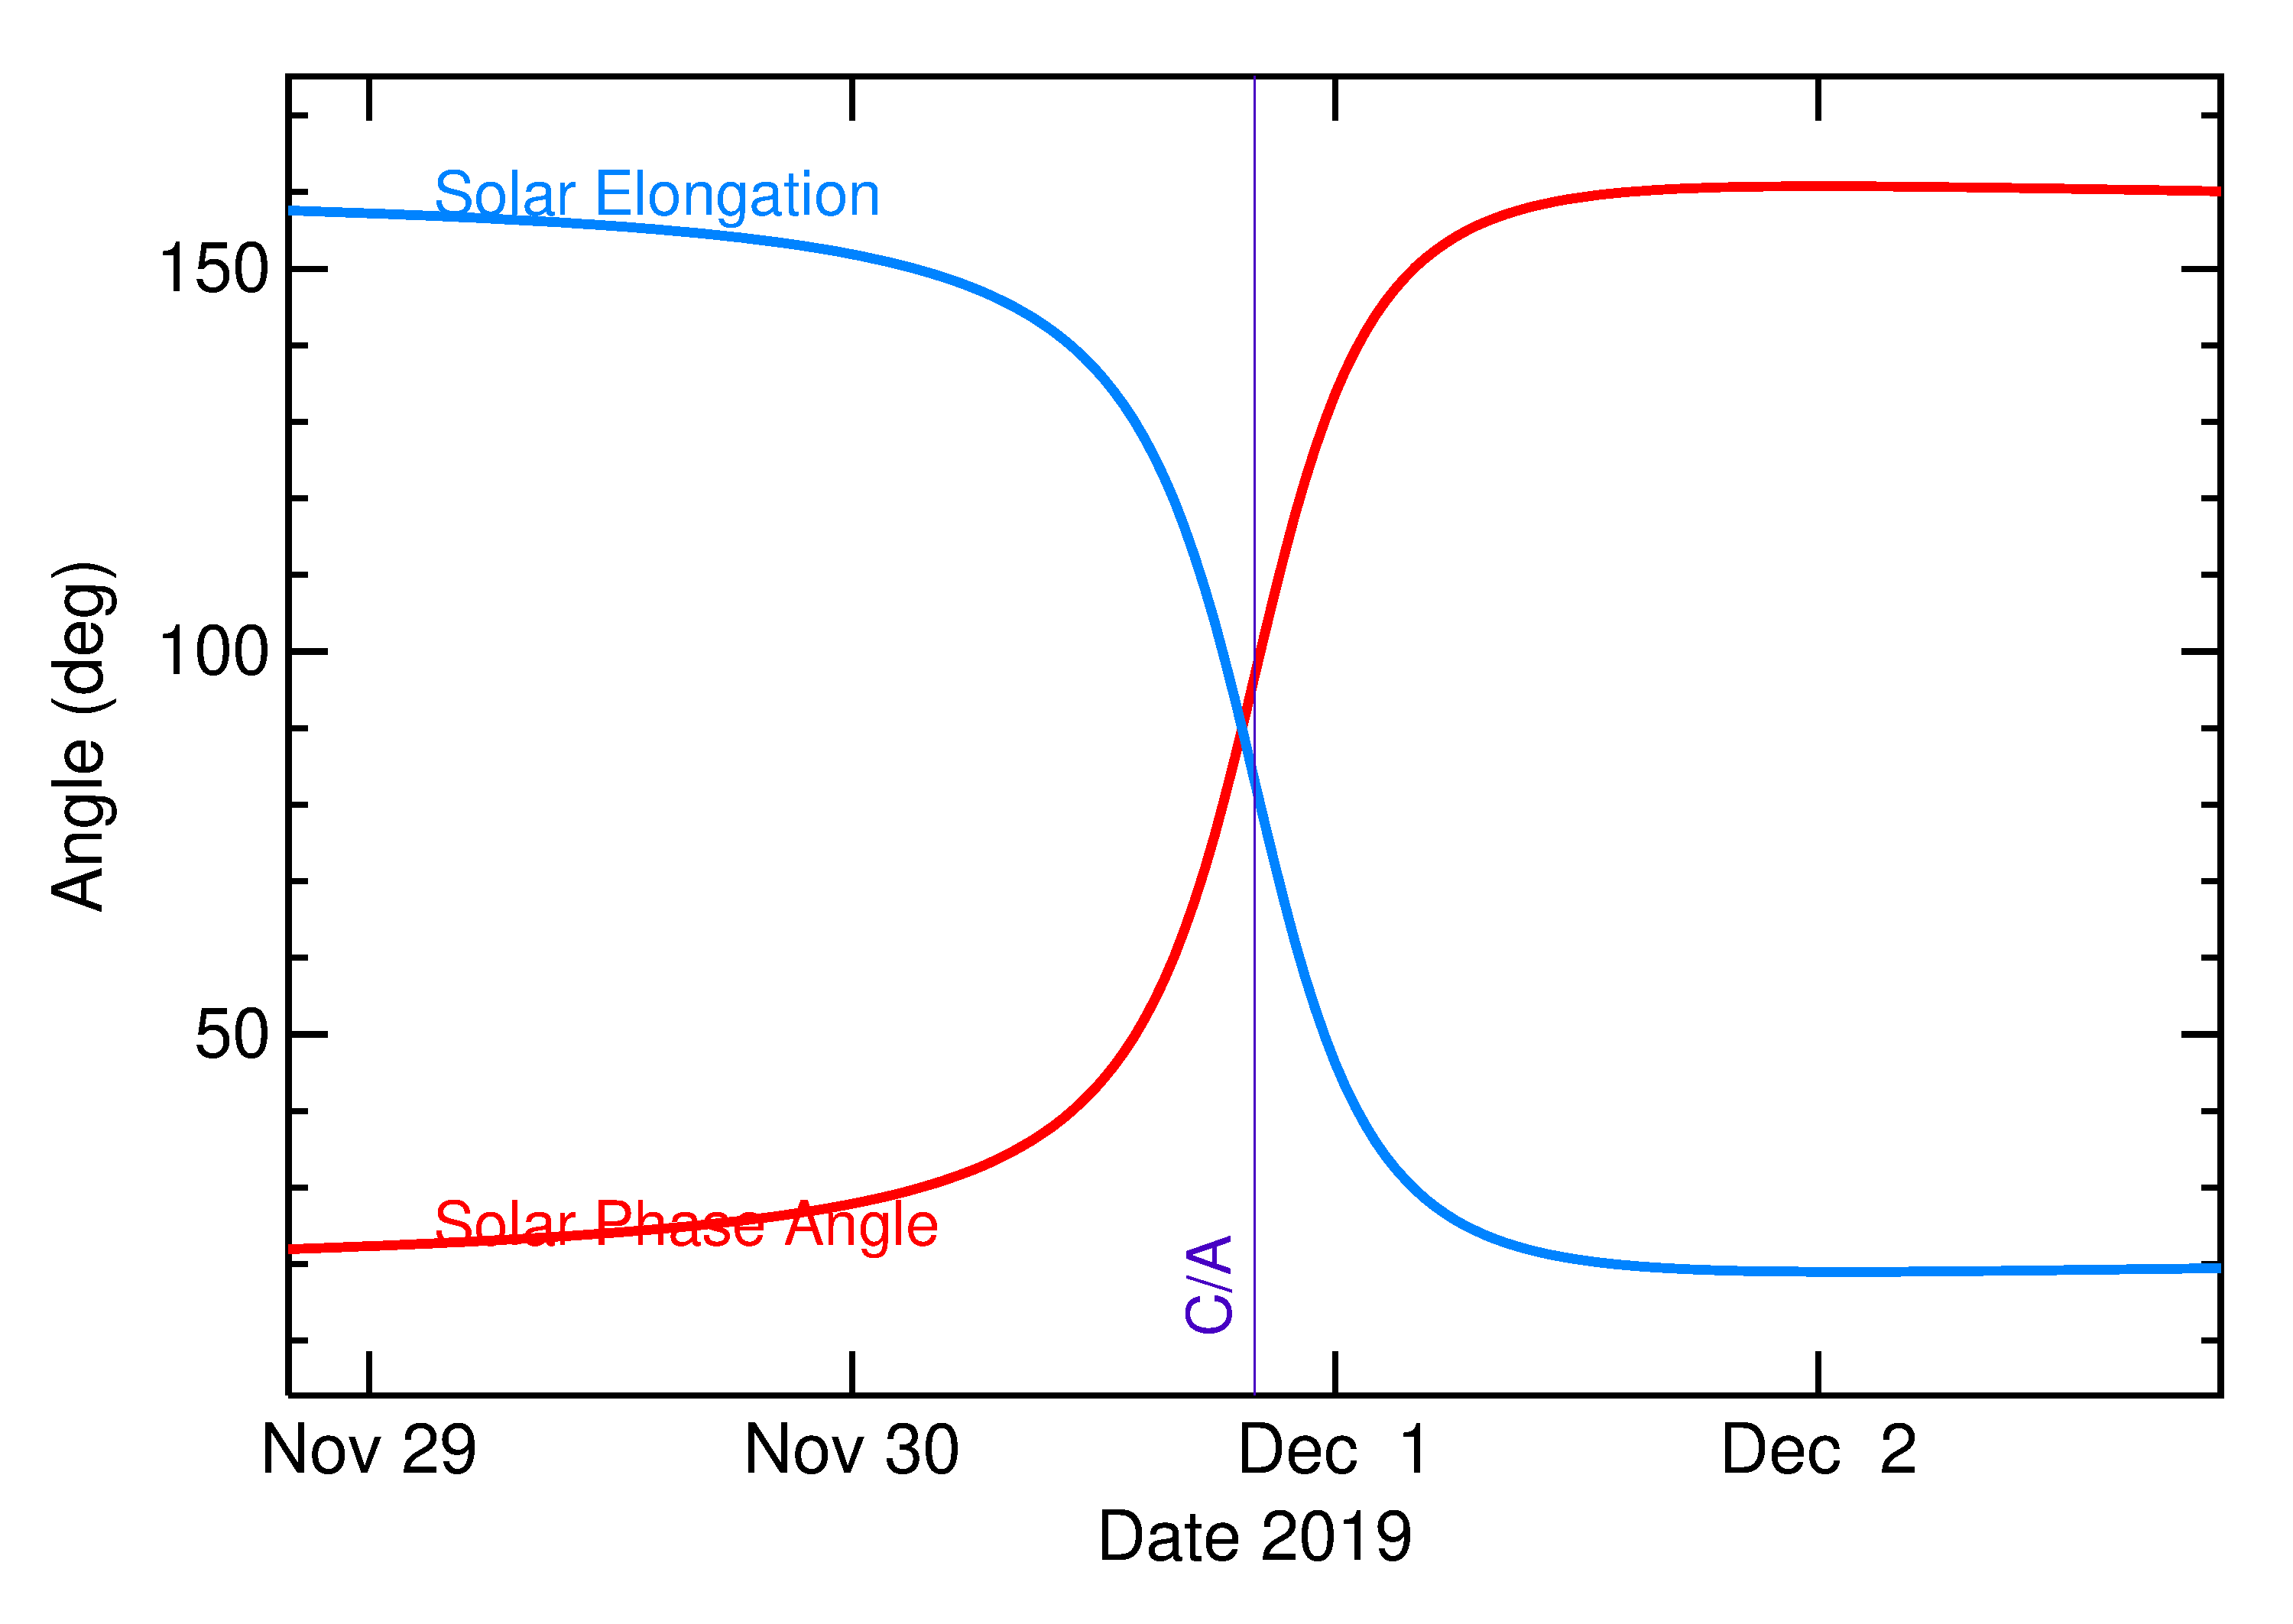 Solar Elongation and Solar Phase Angle of 2019 WJ4 in the days around closest approach